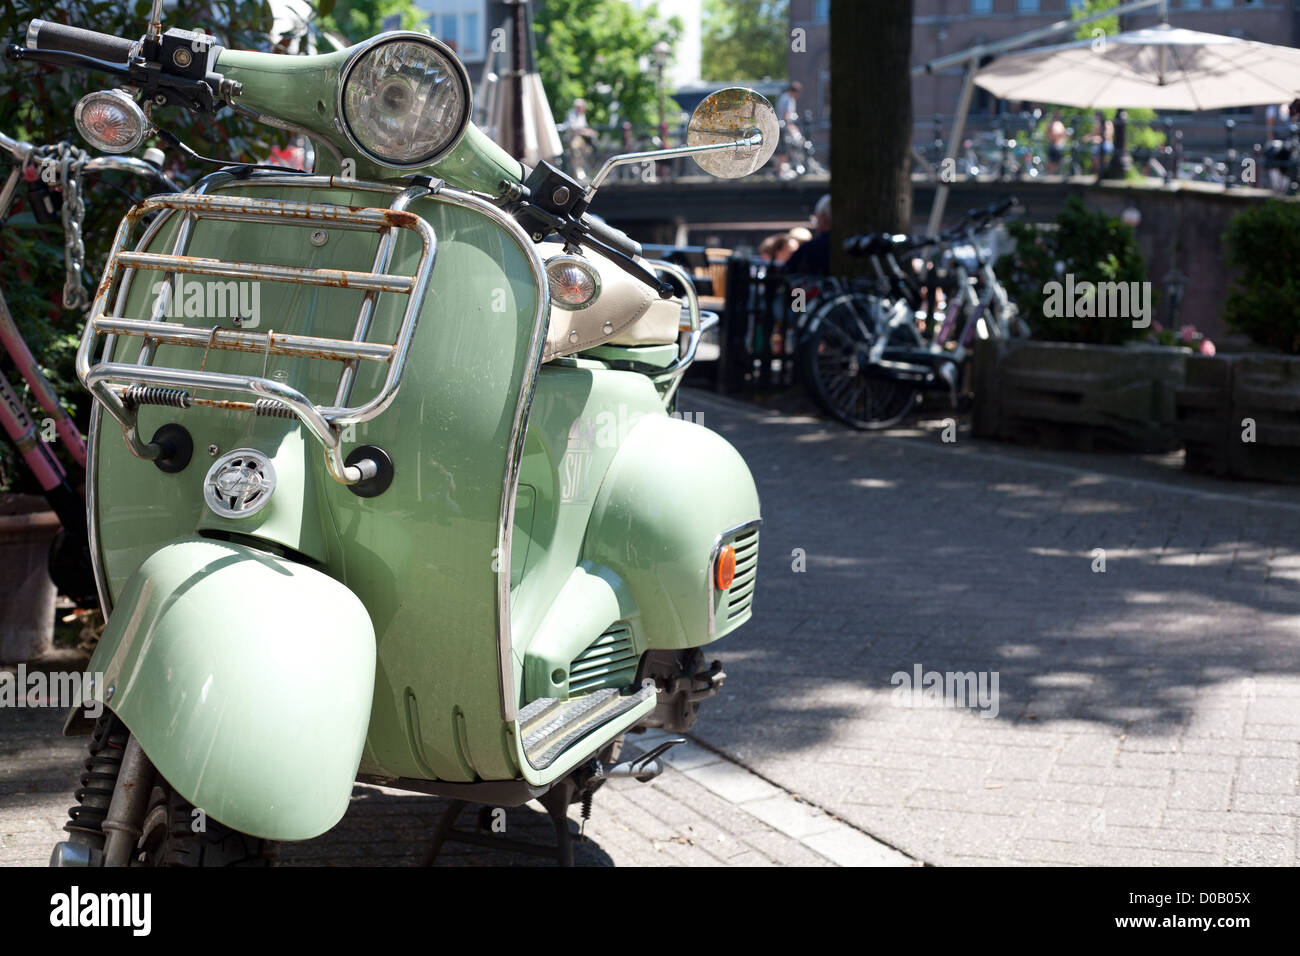 Vespa parked on the sidewalk in Amsterdam Stock Photo